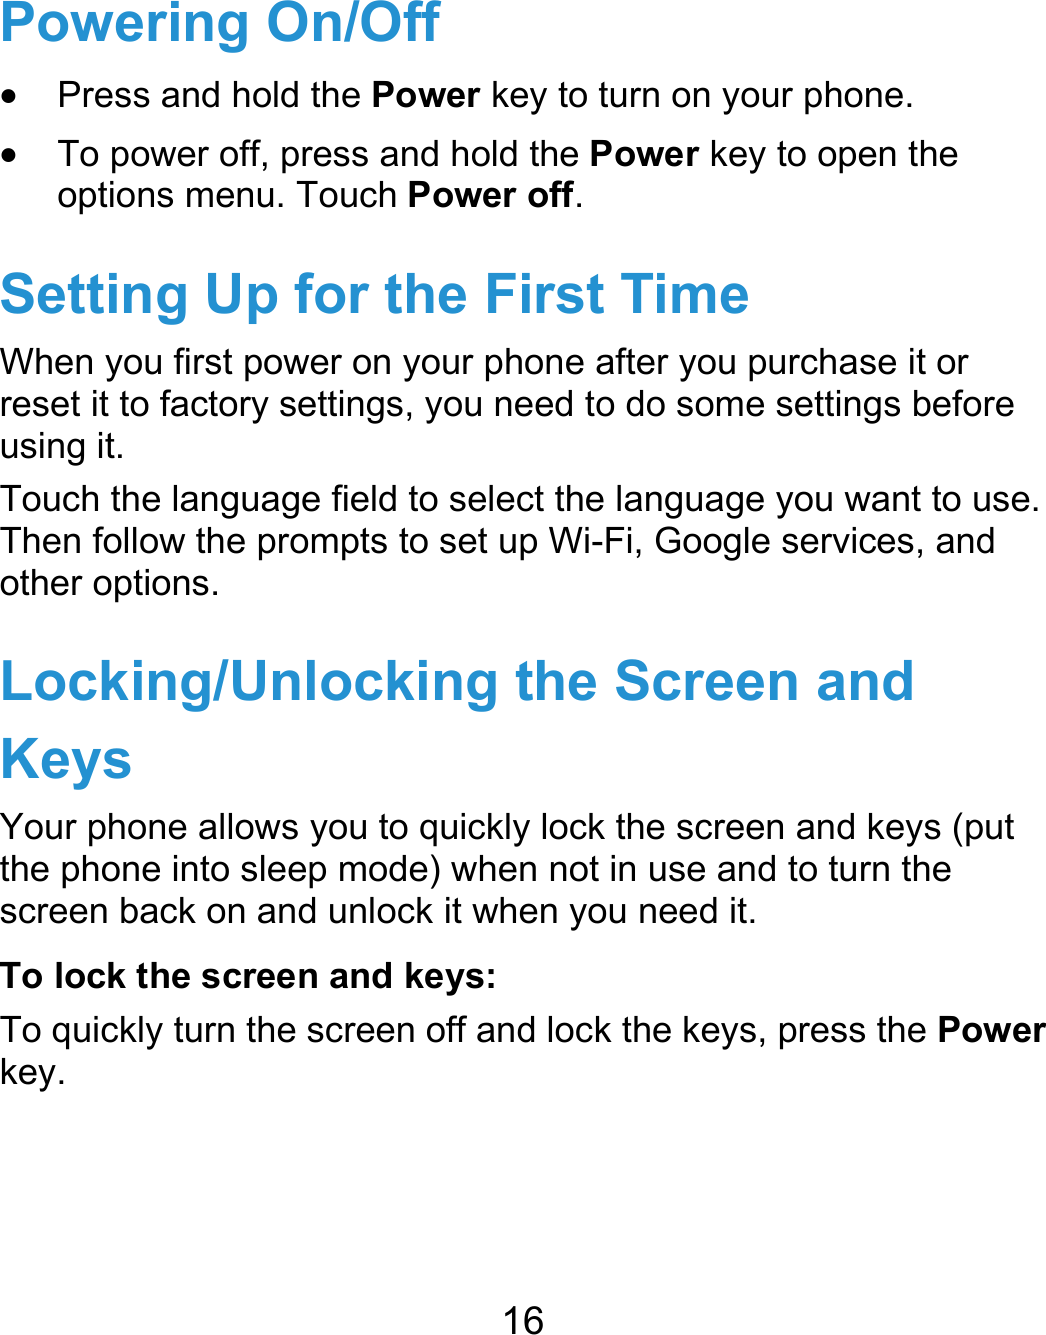  16 Powering On/Off  Press and hold the Power key to turn on your phone.  To power off, press and hold the Power key to open the options menu. Touch Power off. Setting Up for the First Time When you first power on your phone after you purchase it or reset it to factory settings, you need to do some settings before using it. Touch the language field to select the language you want to use. Then follow the prompts to set up Wi-Fi, Google services, and other options. Locking/Unlocking the Screen and Keys Your phone allows you to quickly lock the screen and keys (put the phone into sleep mode) when not in use and to turn the screen back on and unlock it when you need it. To lock the screen and keys: To quickly turn the screen off and lock the keys, press the Power key.    